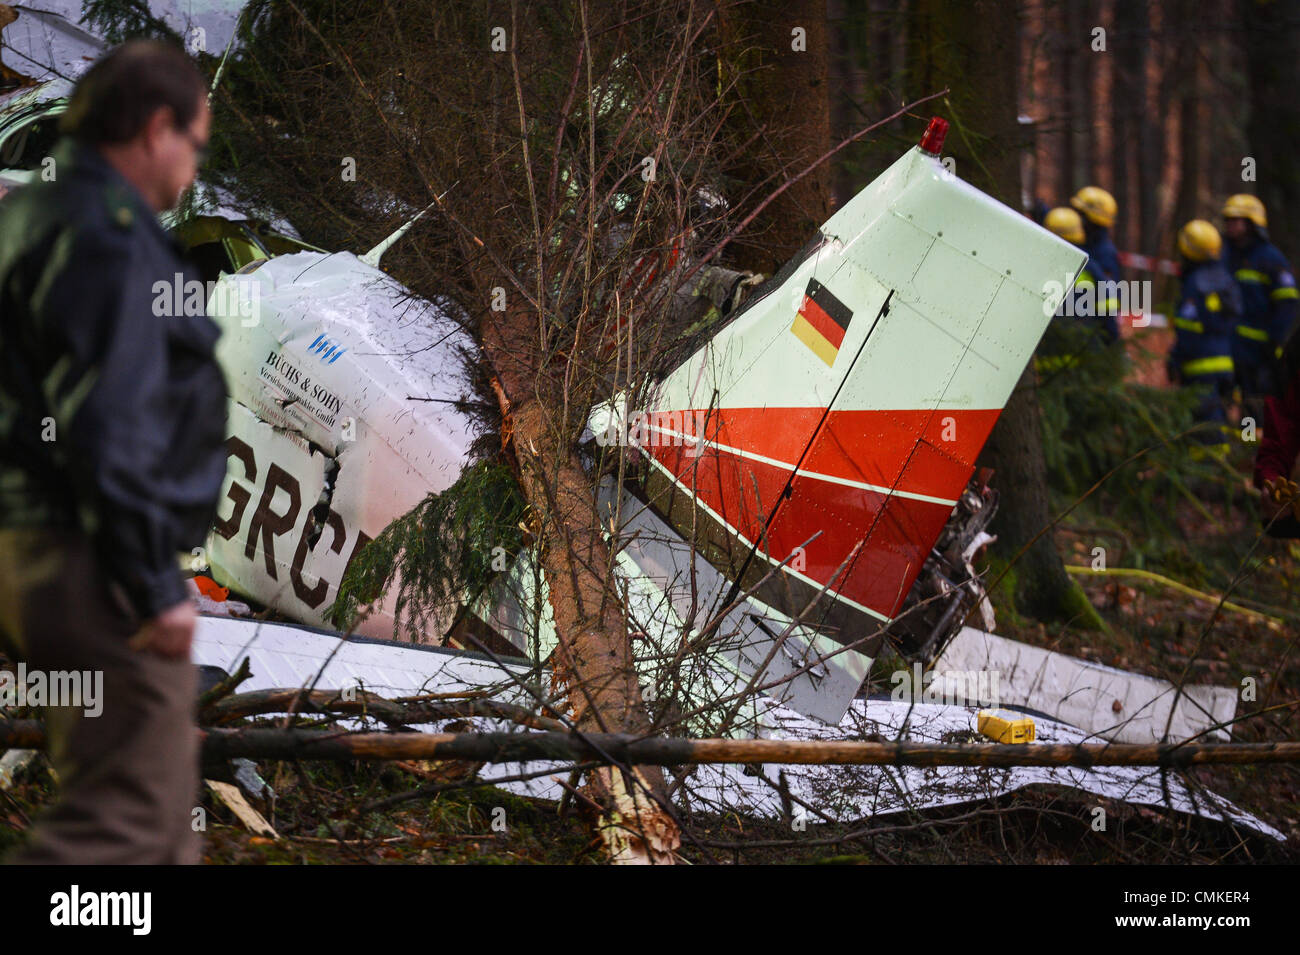 Cortendorf, Germany. 02nd Nov, 2013. The fuselage of a twin-engined aircraft after crashing into a forest in Cortendorf, Germany, 02 November 2013. Three people died in the crash. Photo: DAVID EBENER/dpa/Alamy Live News Stock Photo